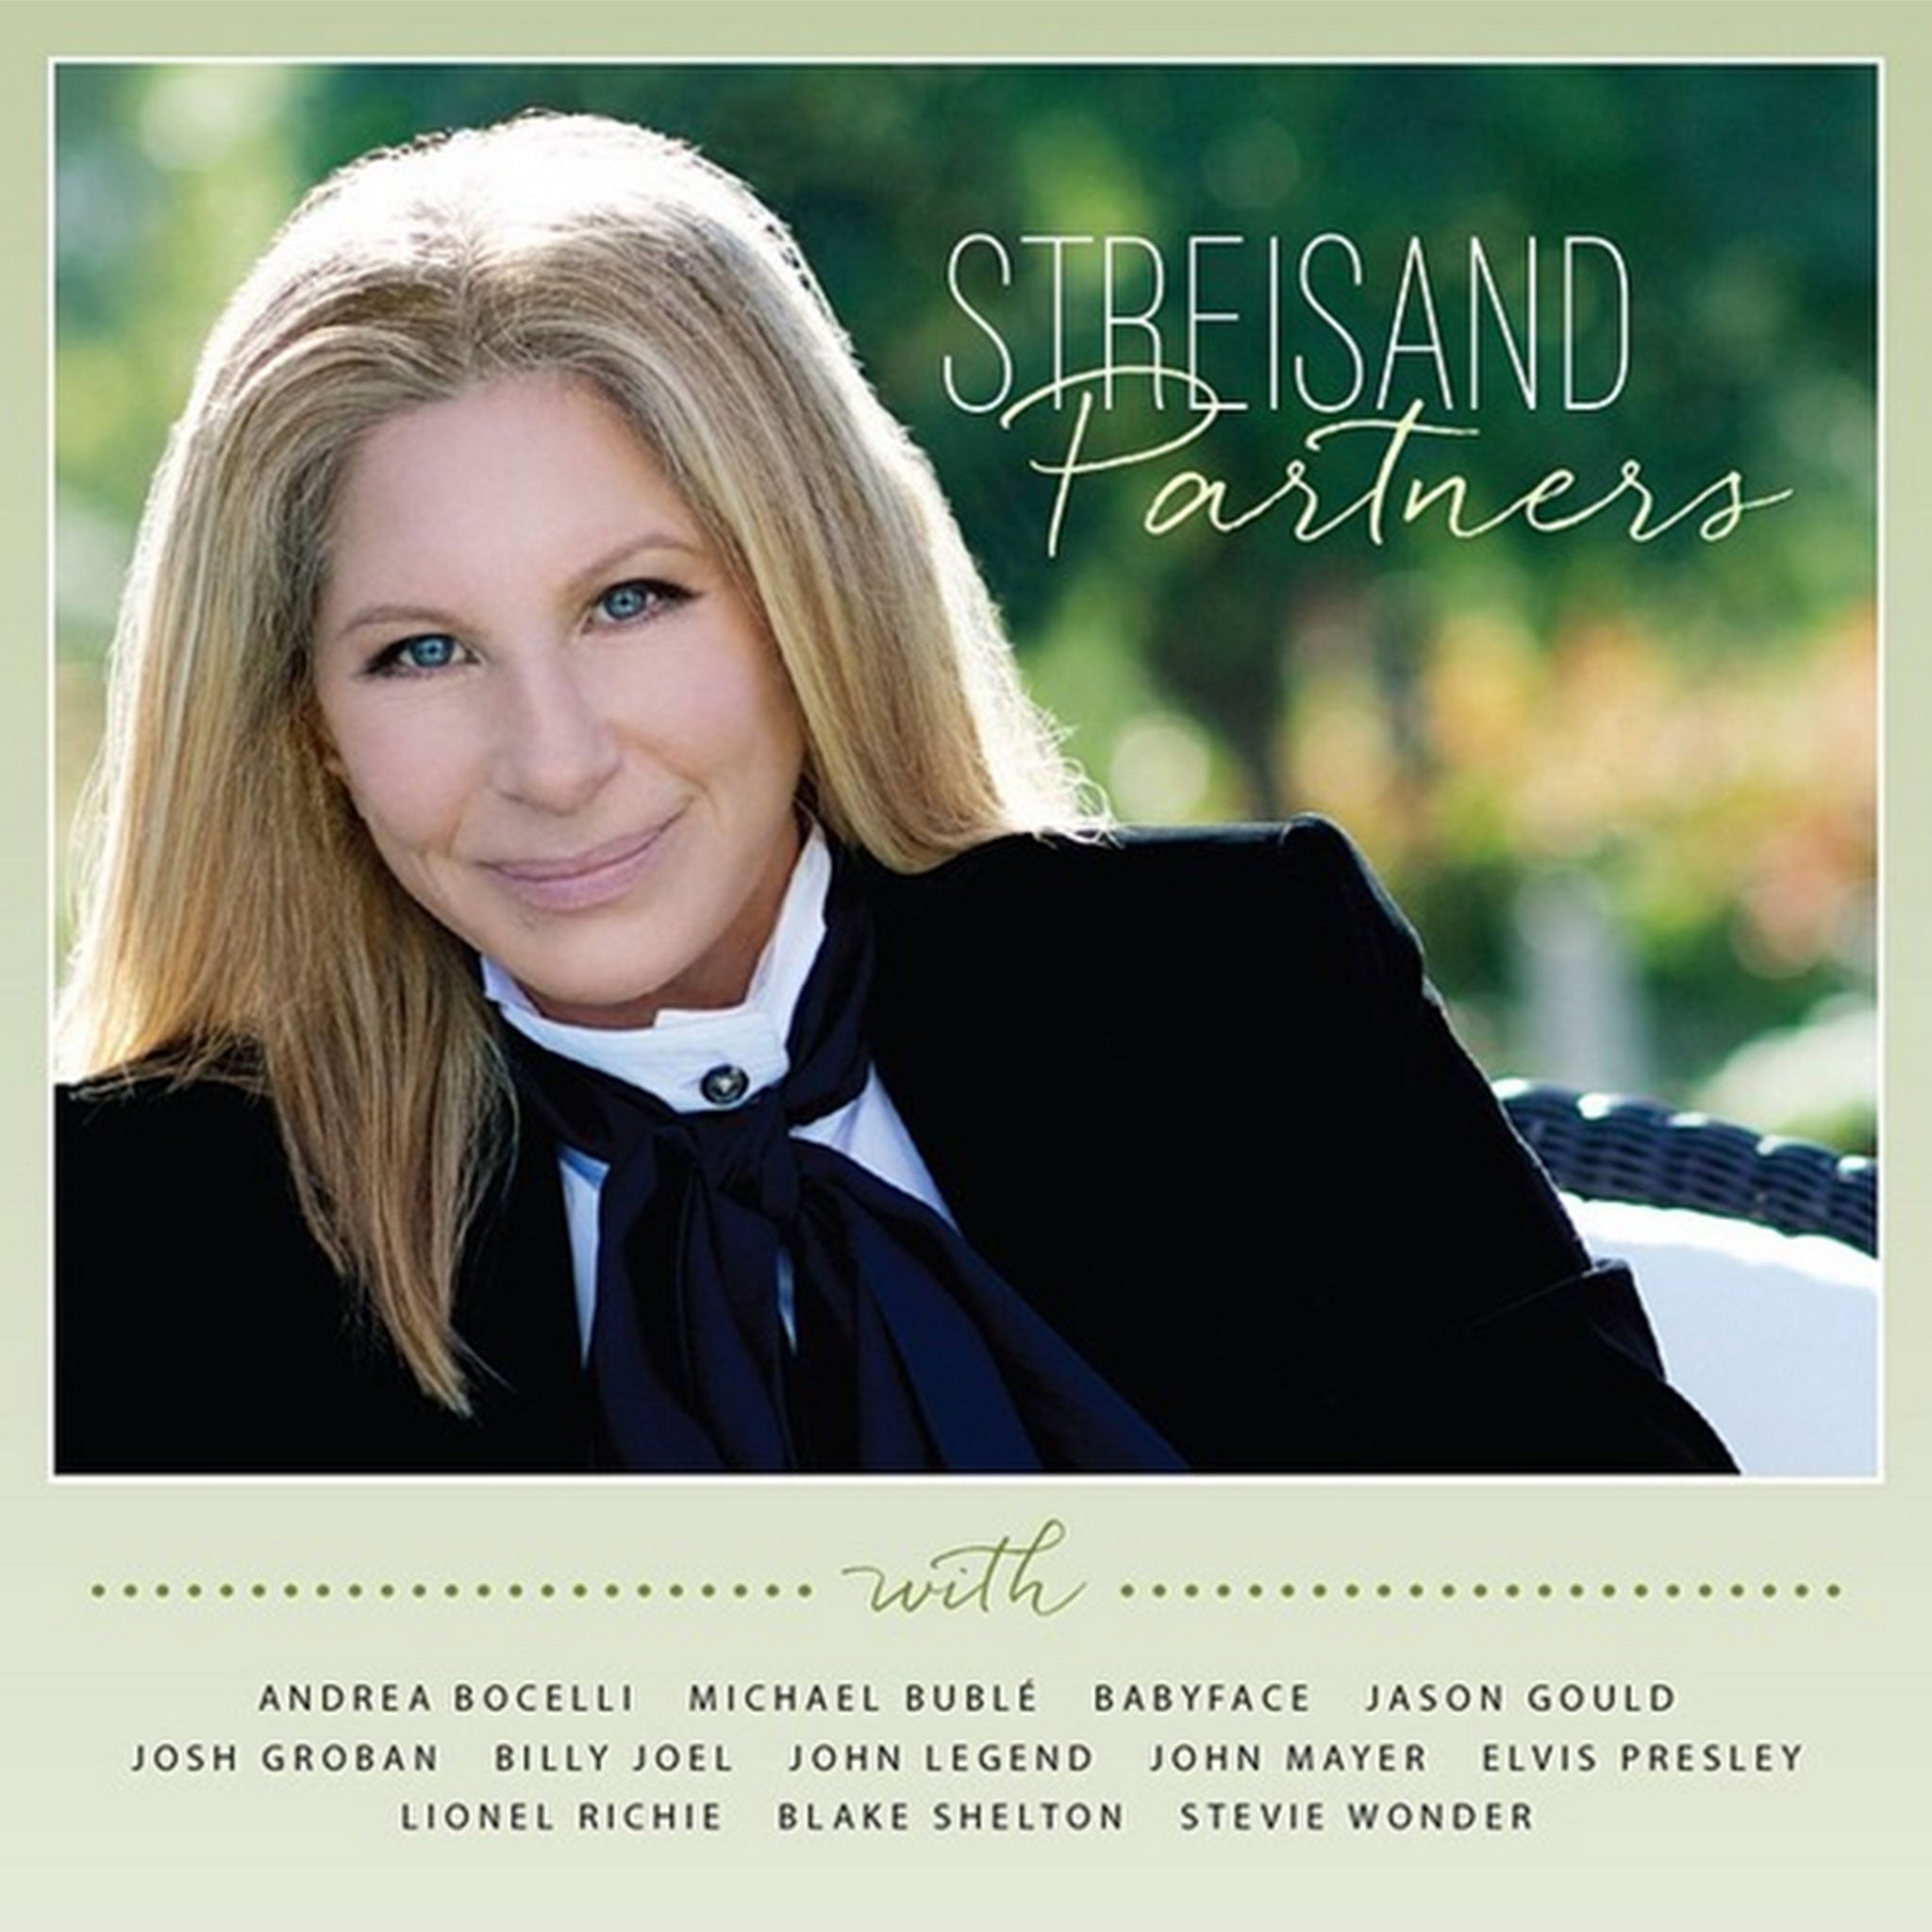 Barbra Streisand's new all-star duets album Partners is due out next month